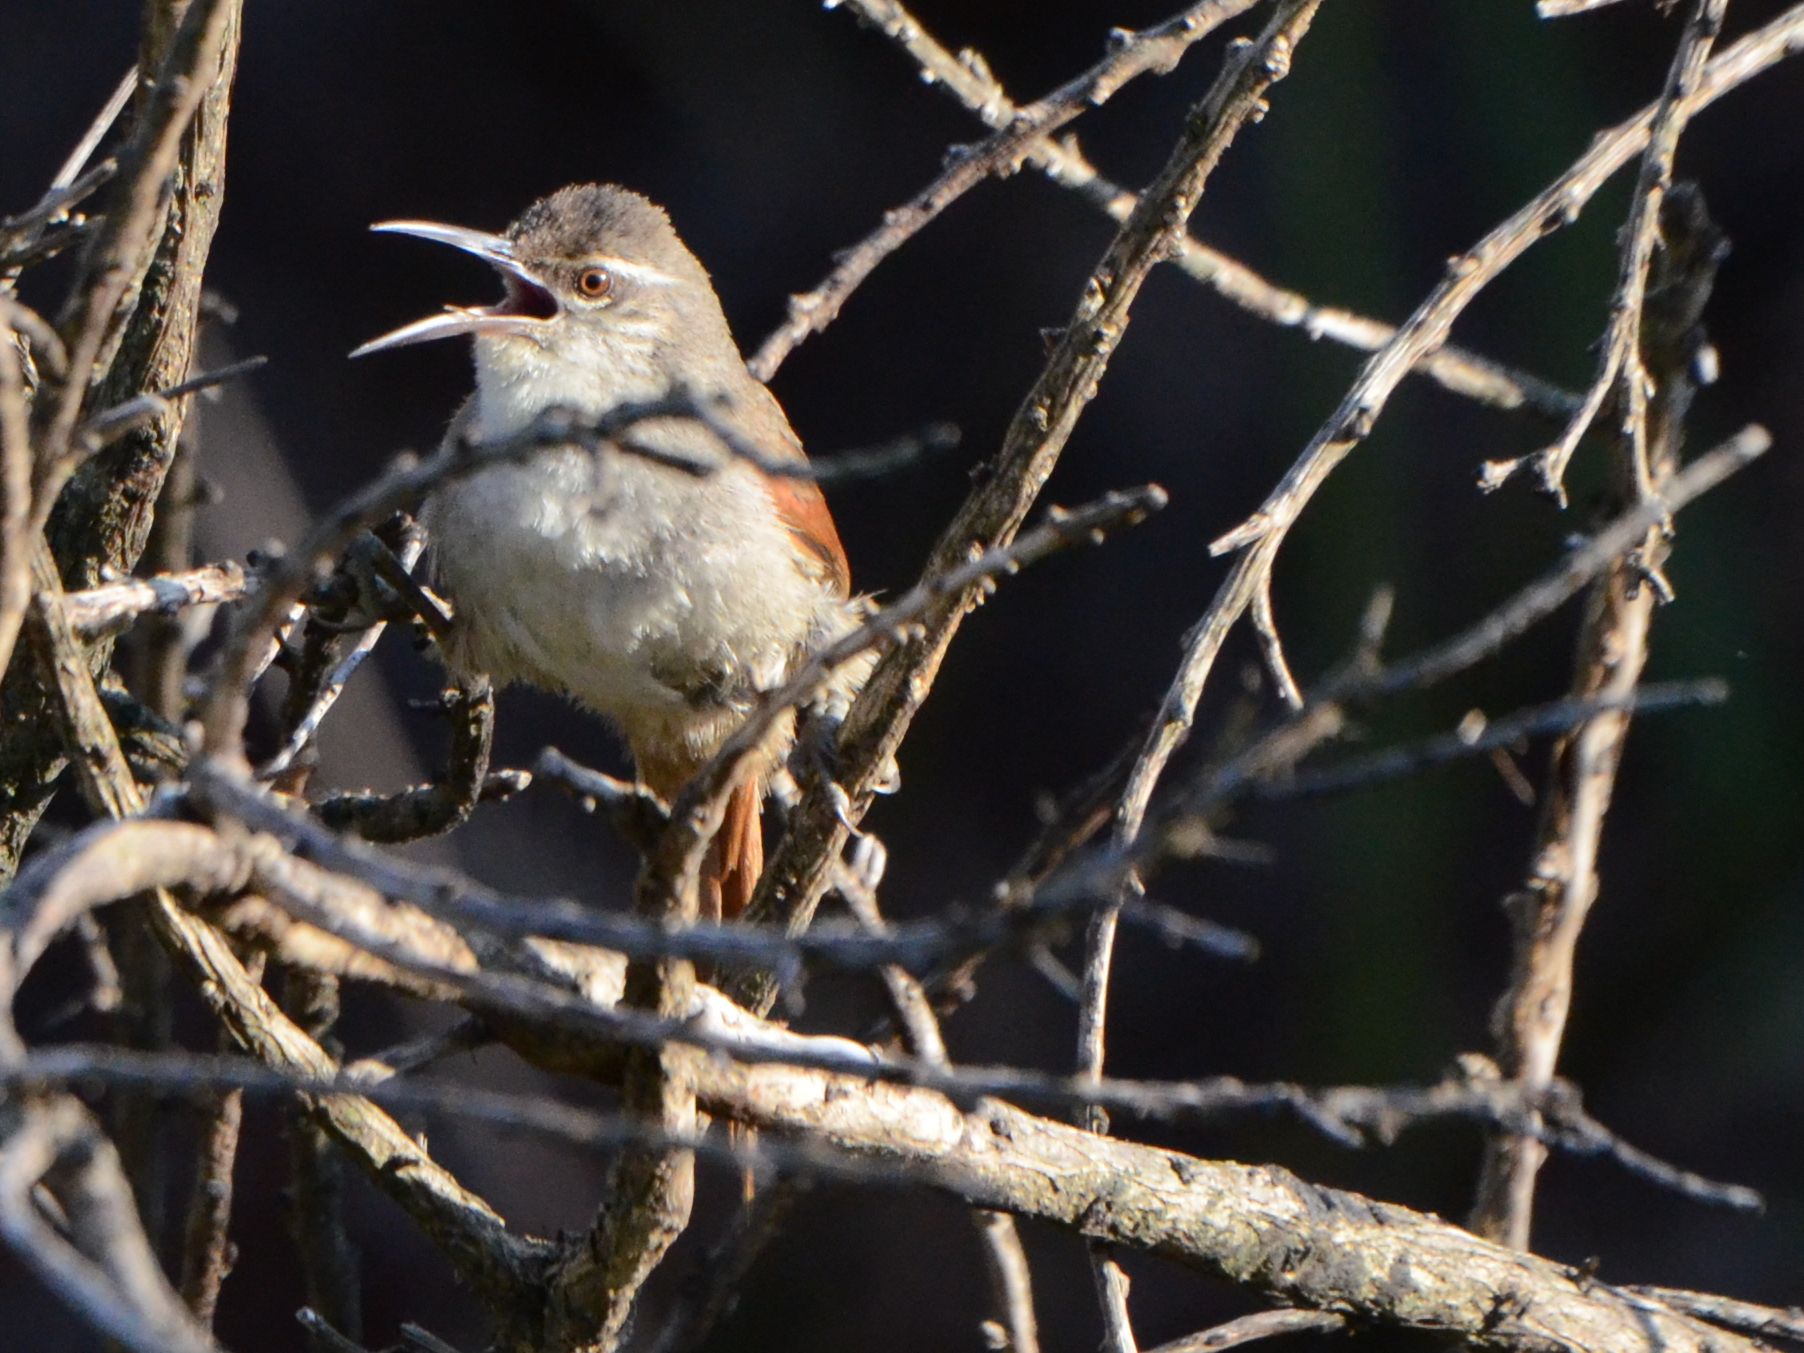 Click picture to see more Straight-billed Reedhaunters.